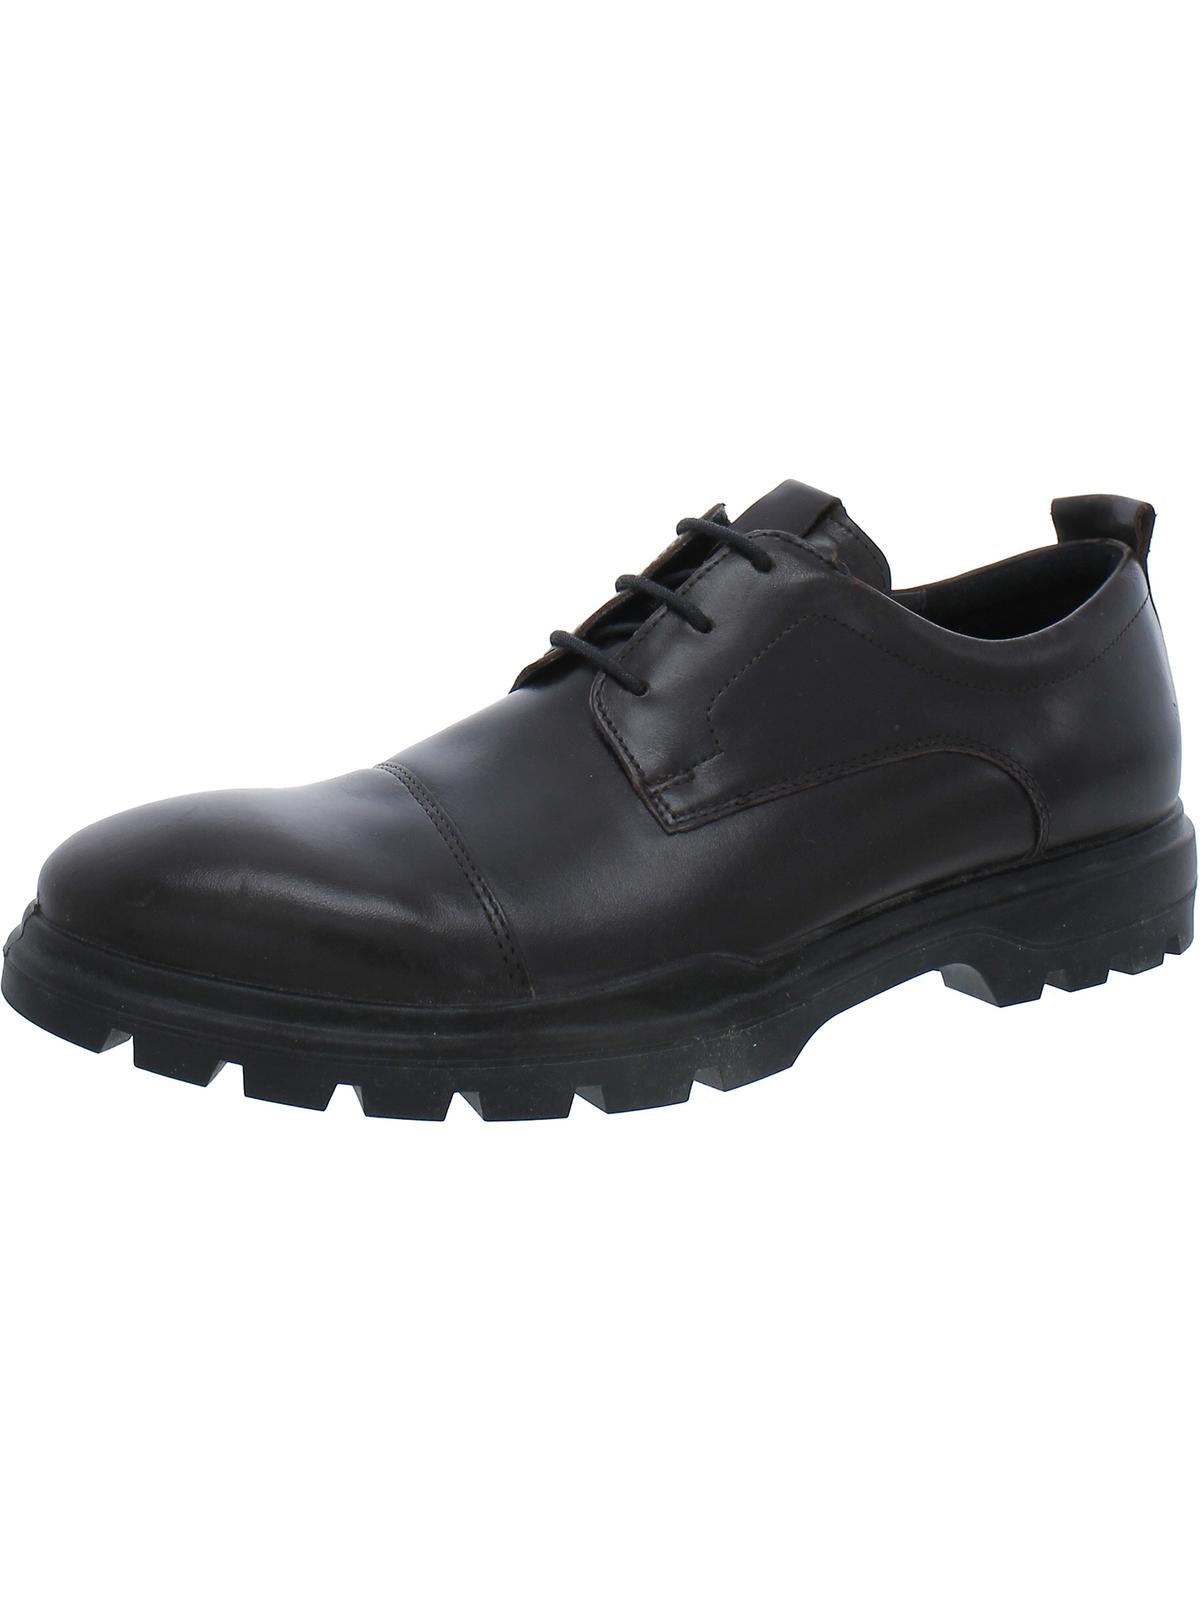 Ecco City Tray Avant Mens Leather Derby Shoes In Black